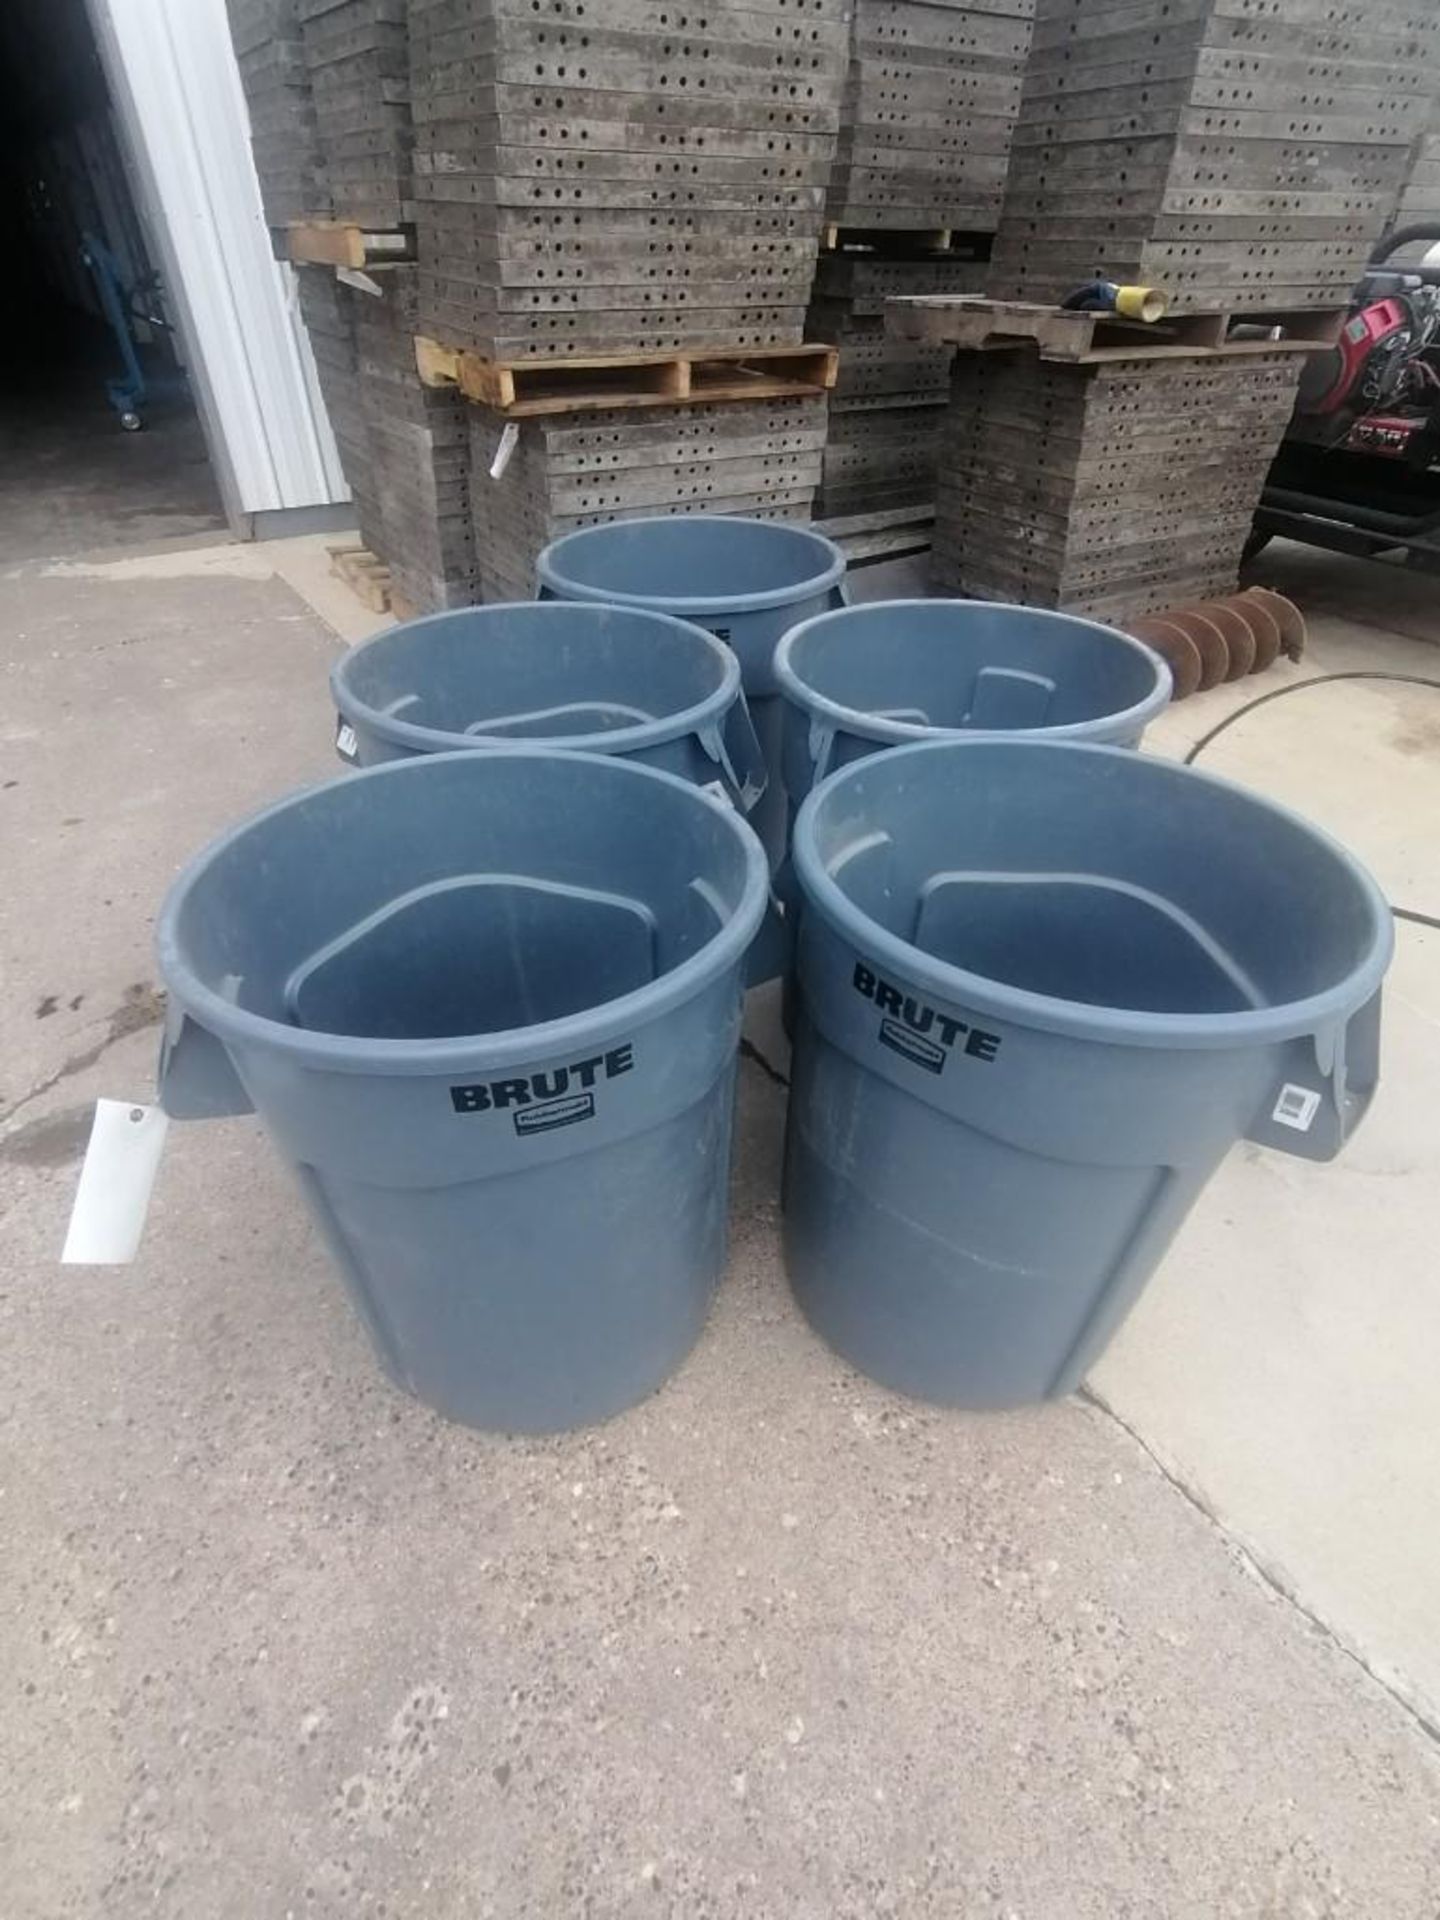 (5) Rubbermaid Brute Trash Can. Located at 301 E Henry Street, Mt. Pleasant, IA 52641.